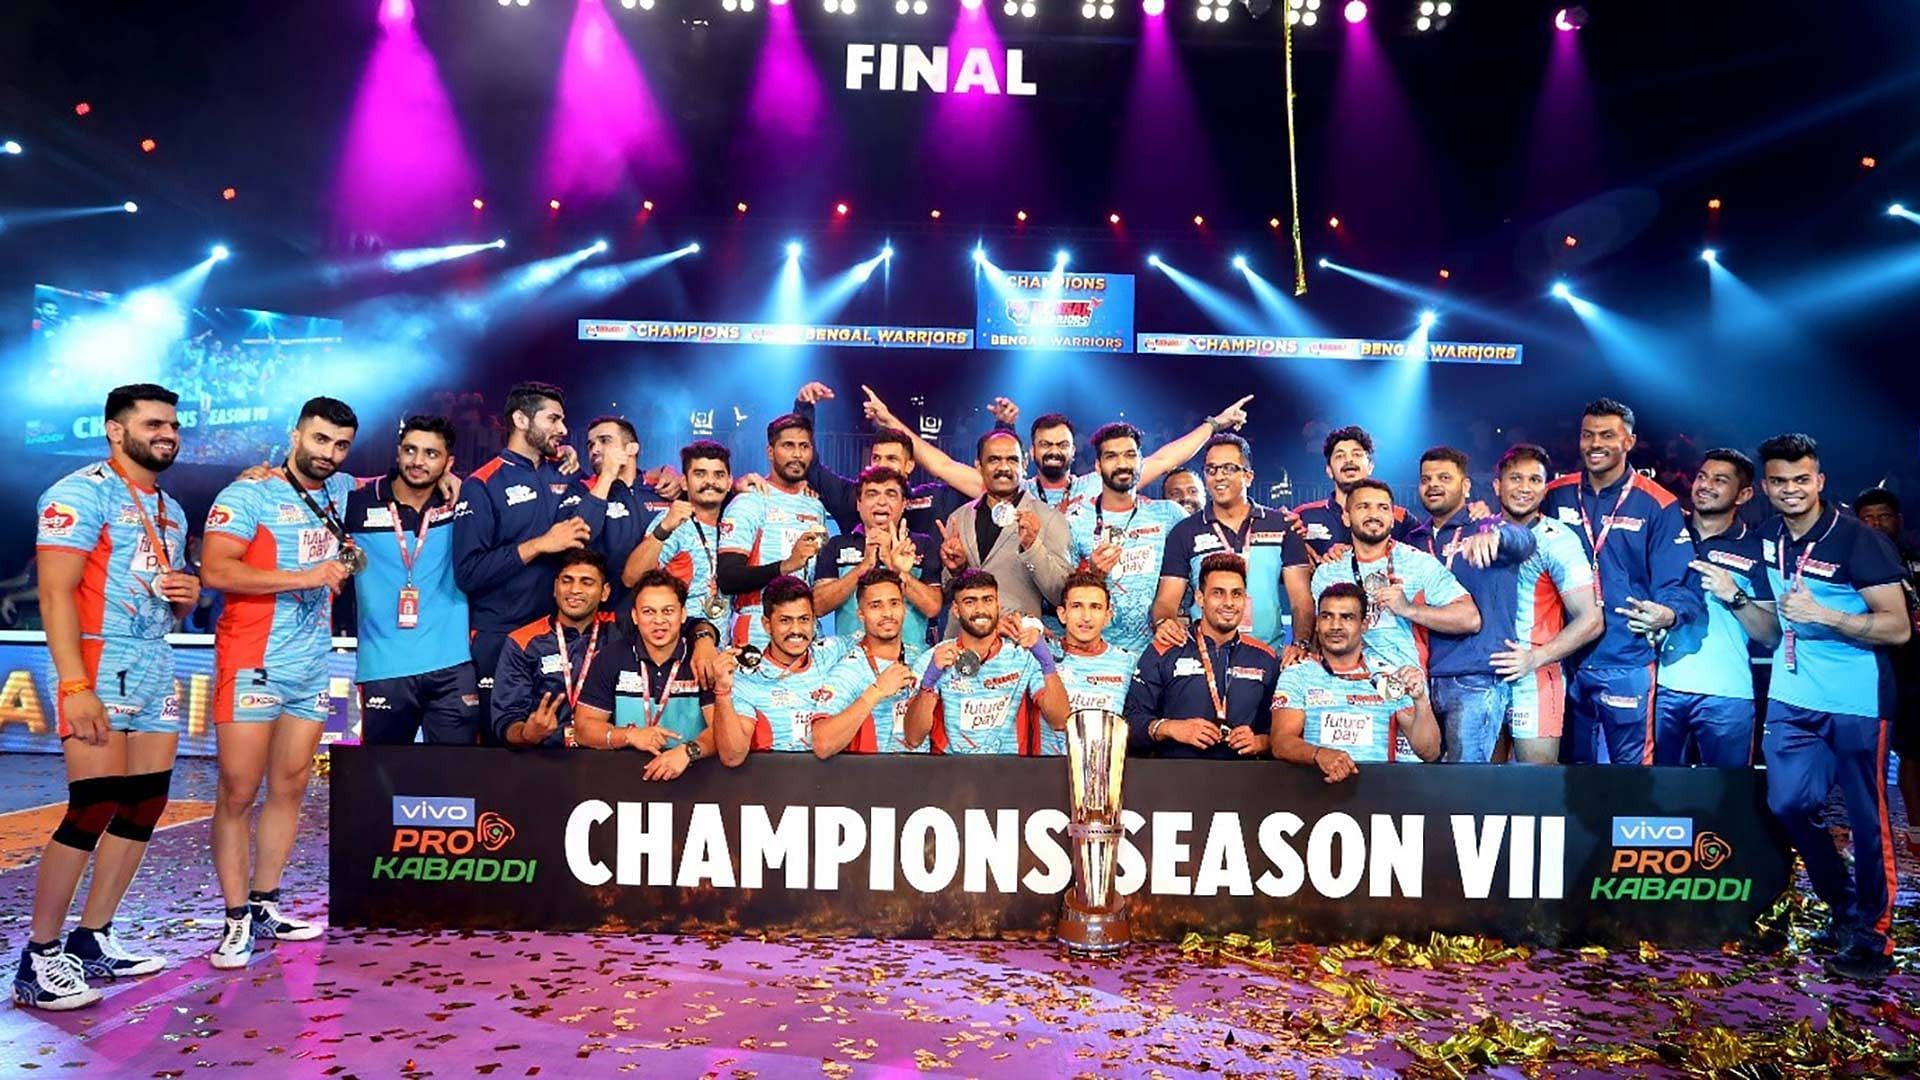 Bengal Warriors are the defending champions after a stellar Pro Kabaddi Season 7 campaign